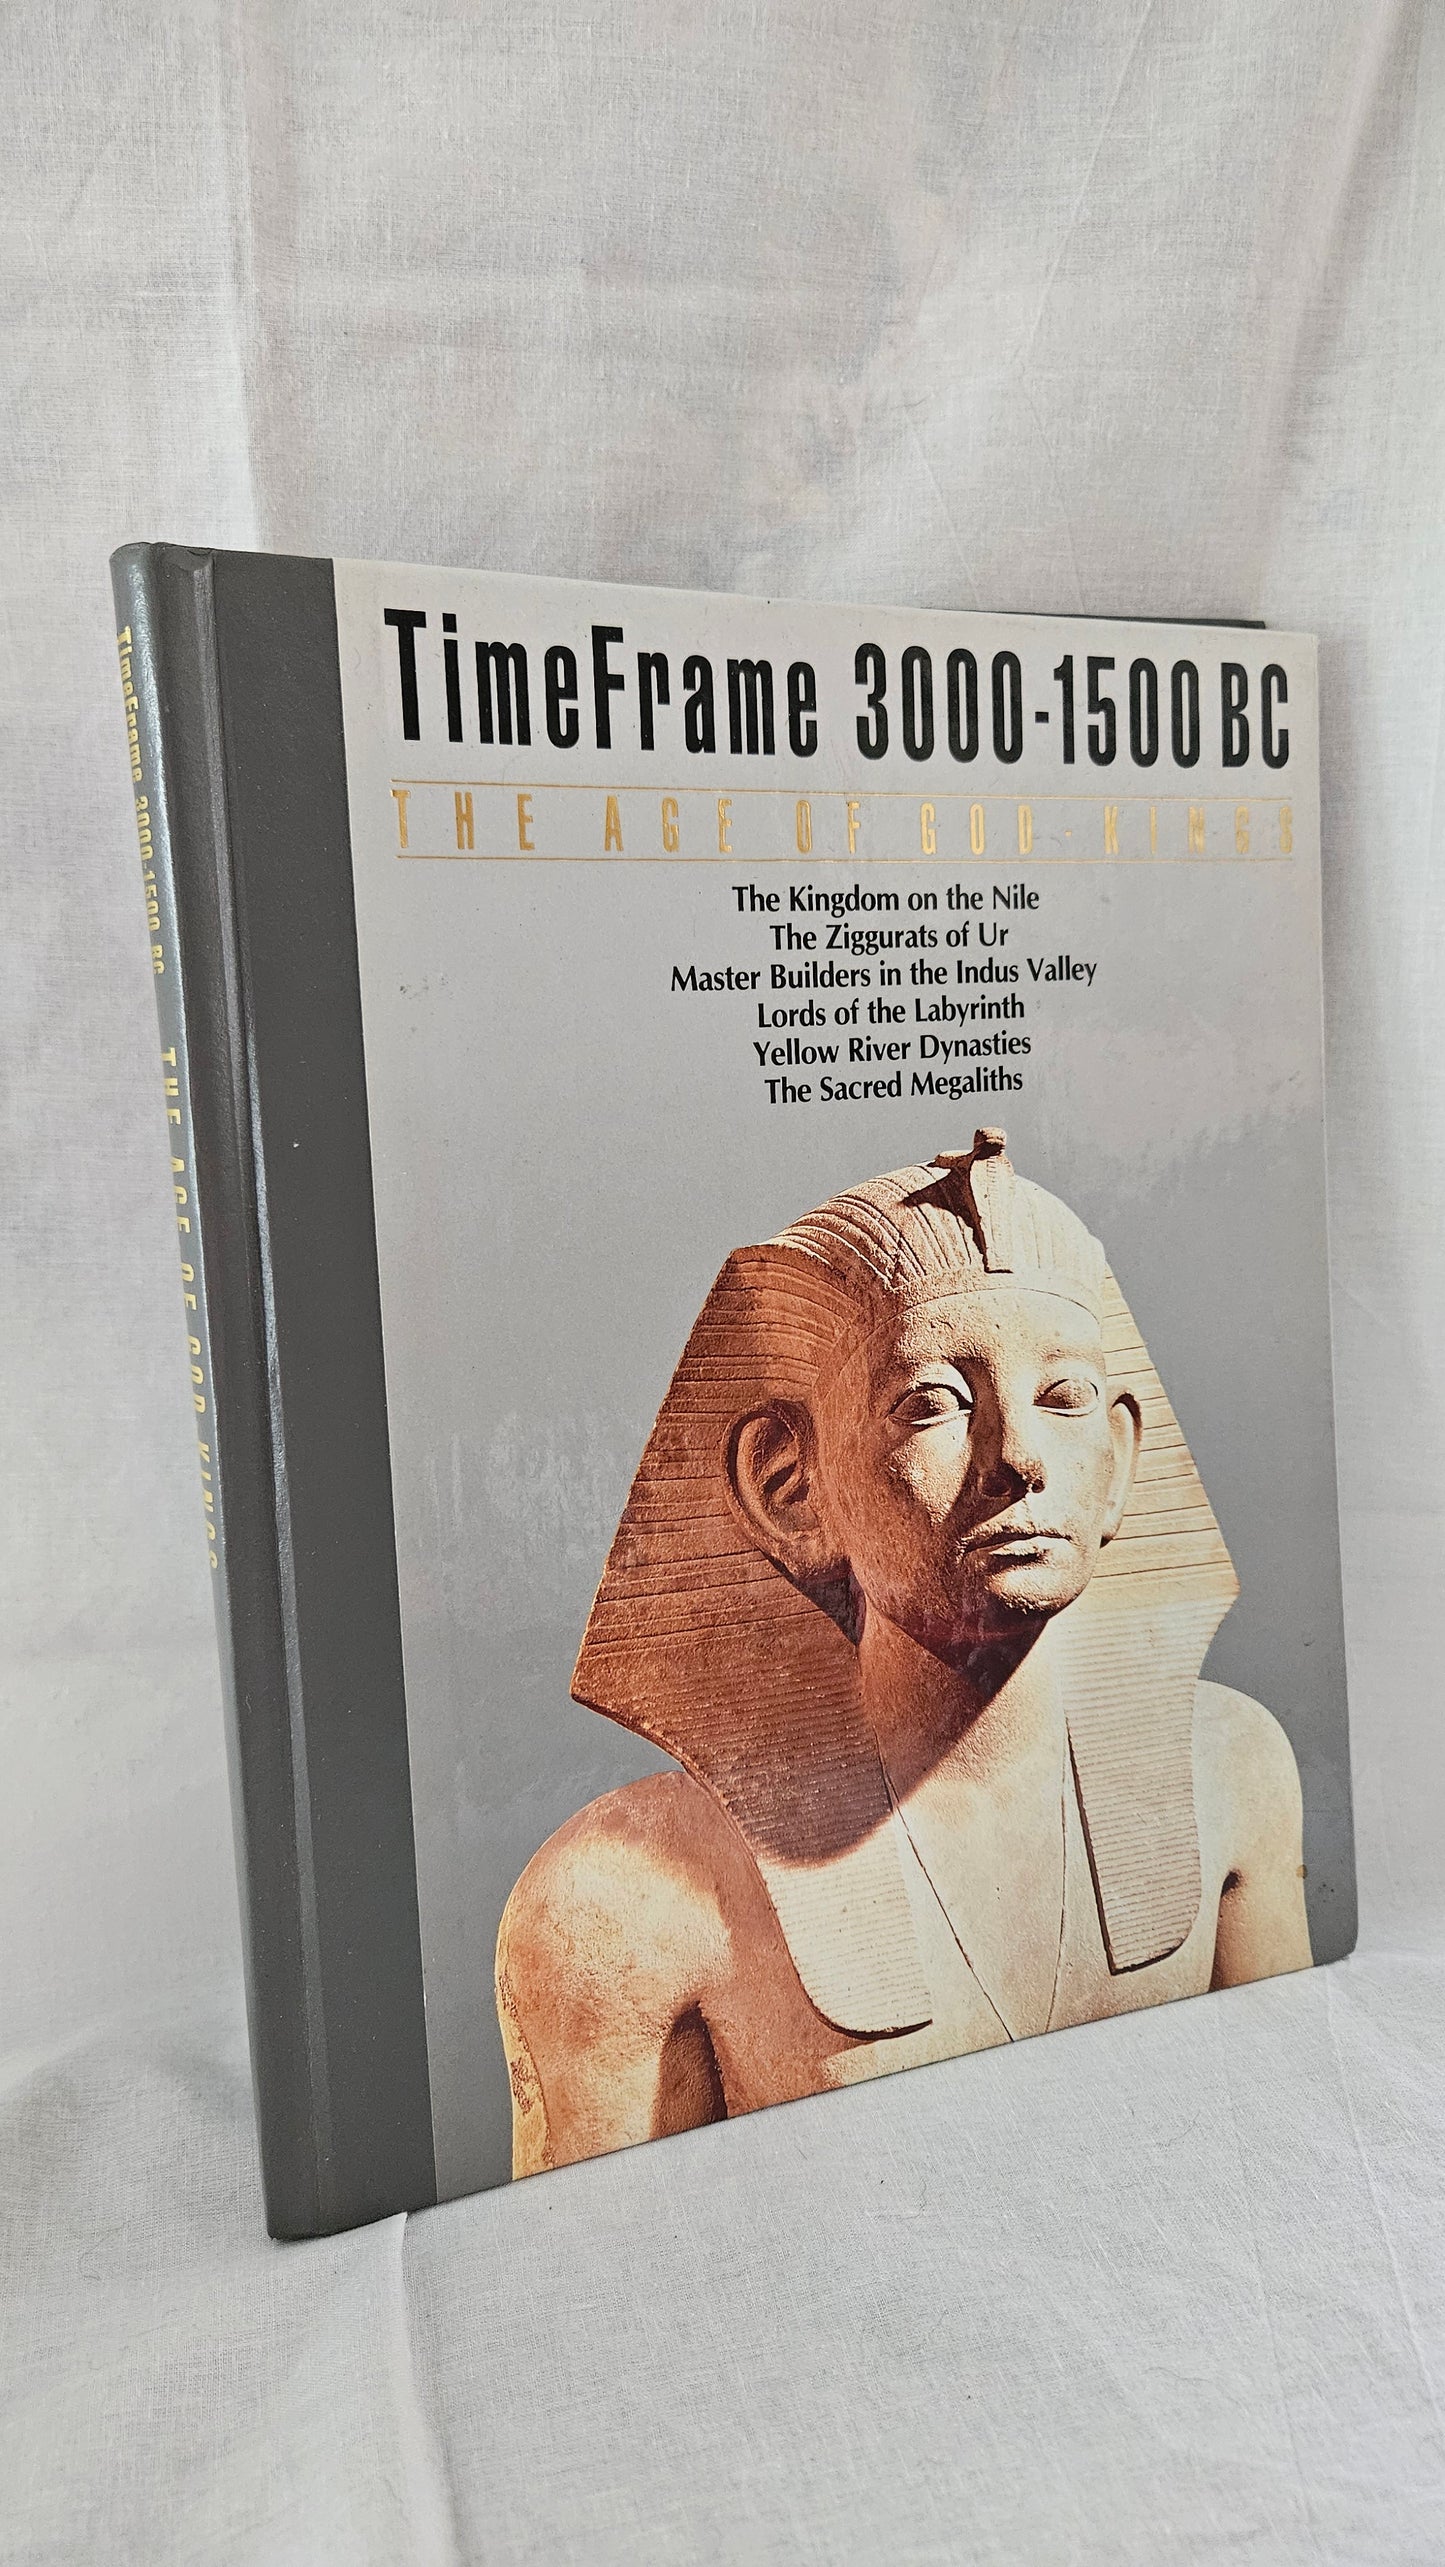 TimeFrame 3000-1500 BC The Age of God-Kings